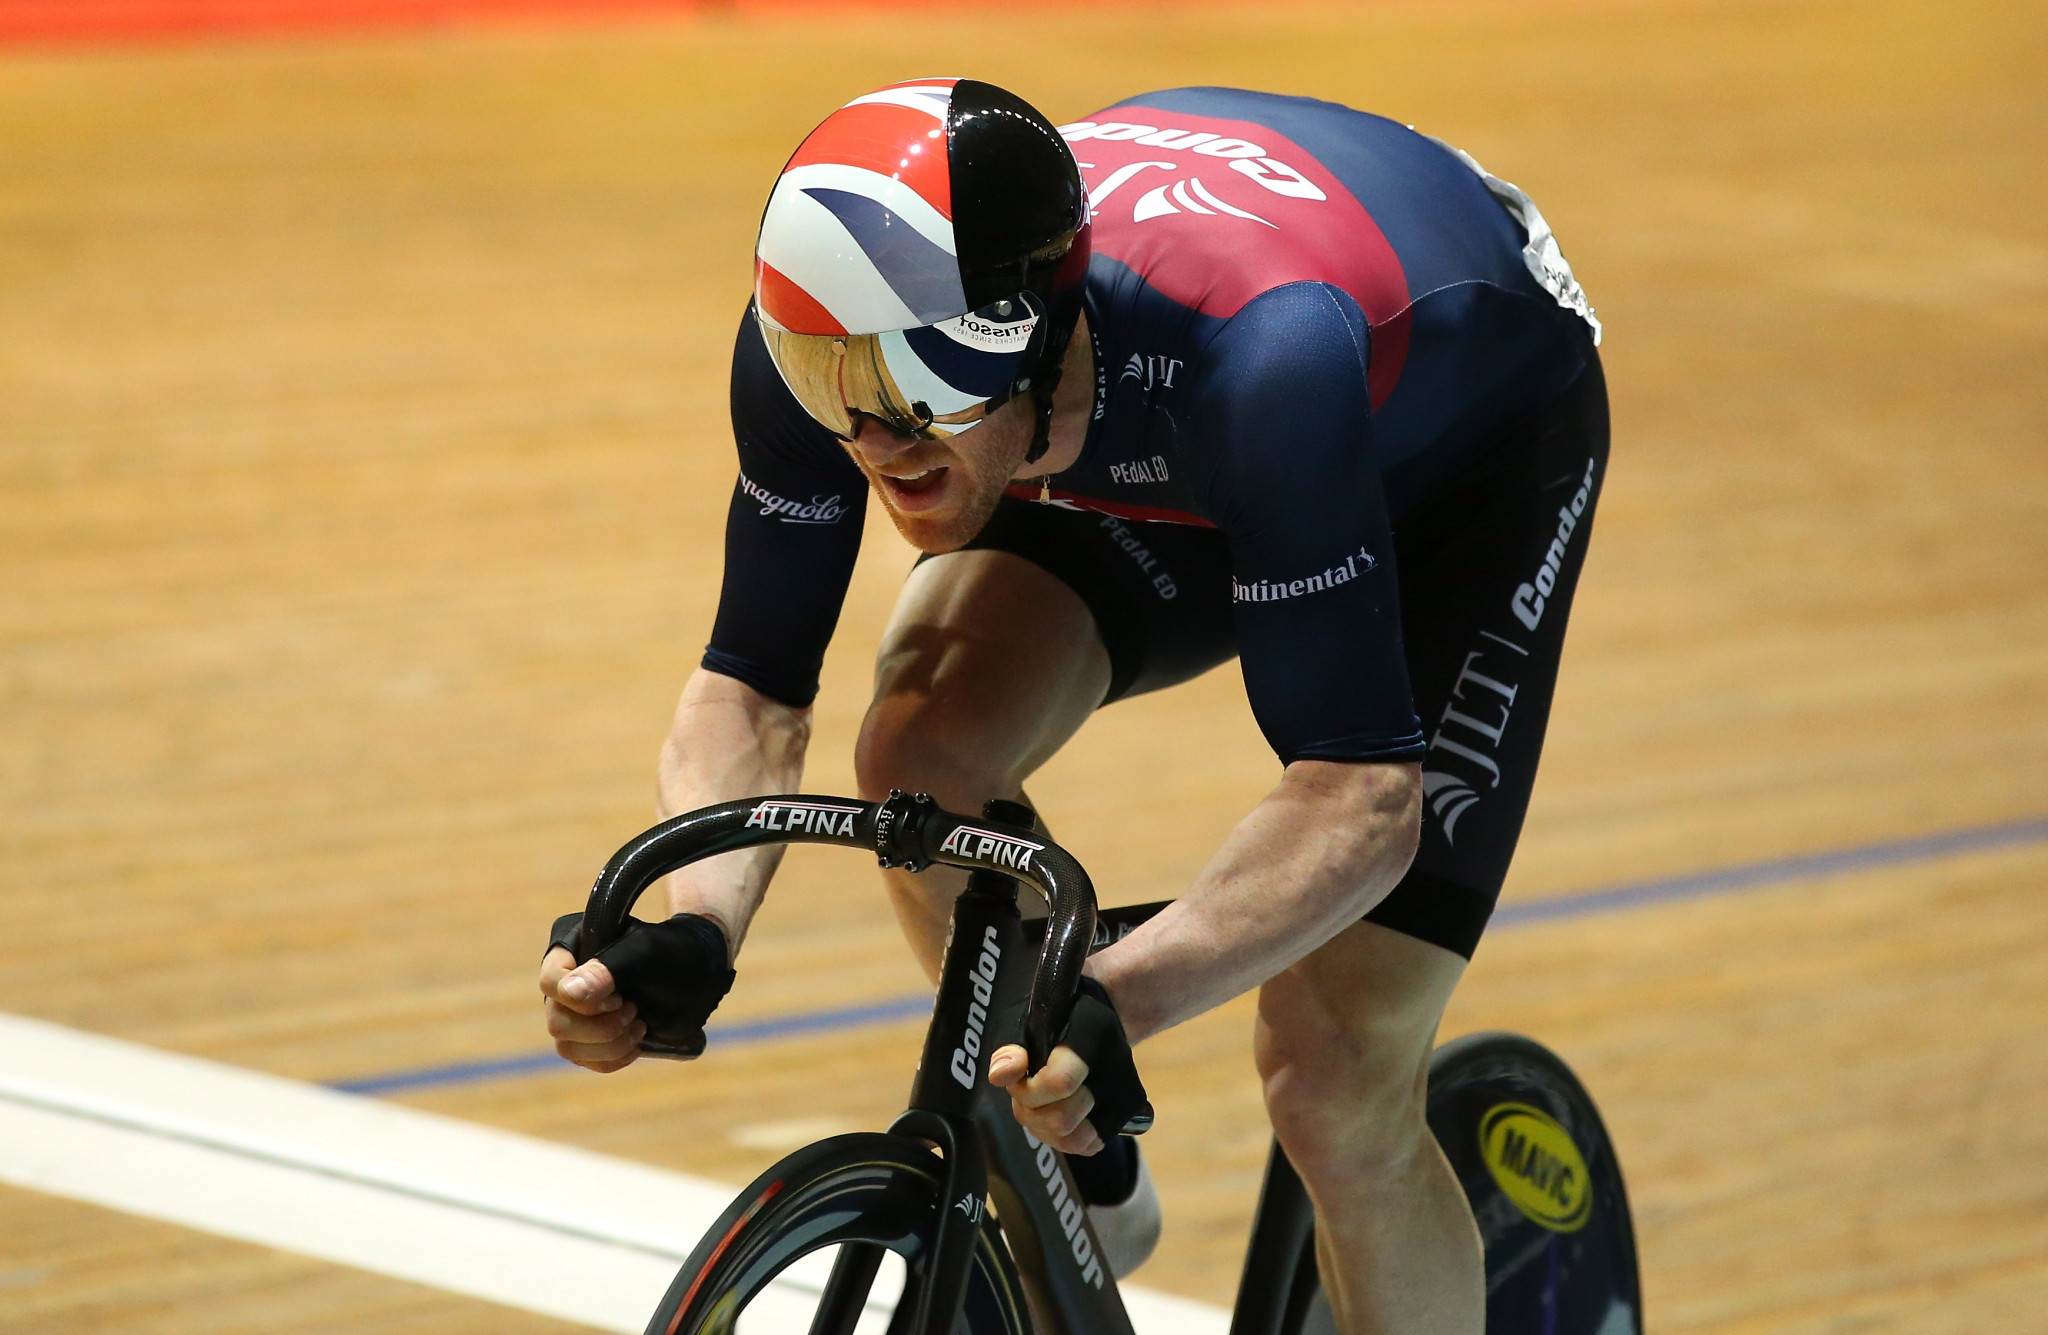 Triple Olympic champion Ed Clancy will spearhead Great Britain's pursuit of glory at the UCI Track Cycling World Cup in Saint-Quentin-en-Yvelines in France ©Getty Images